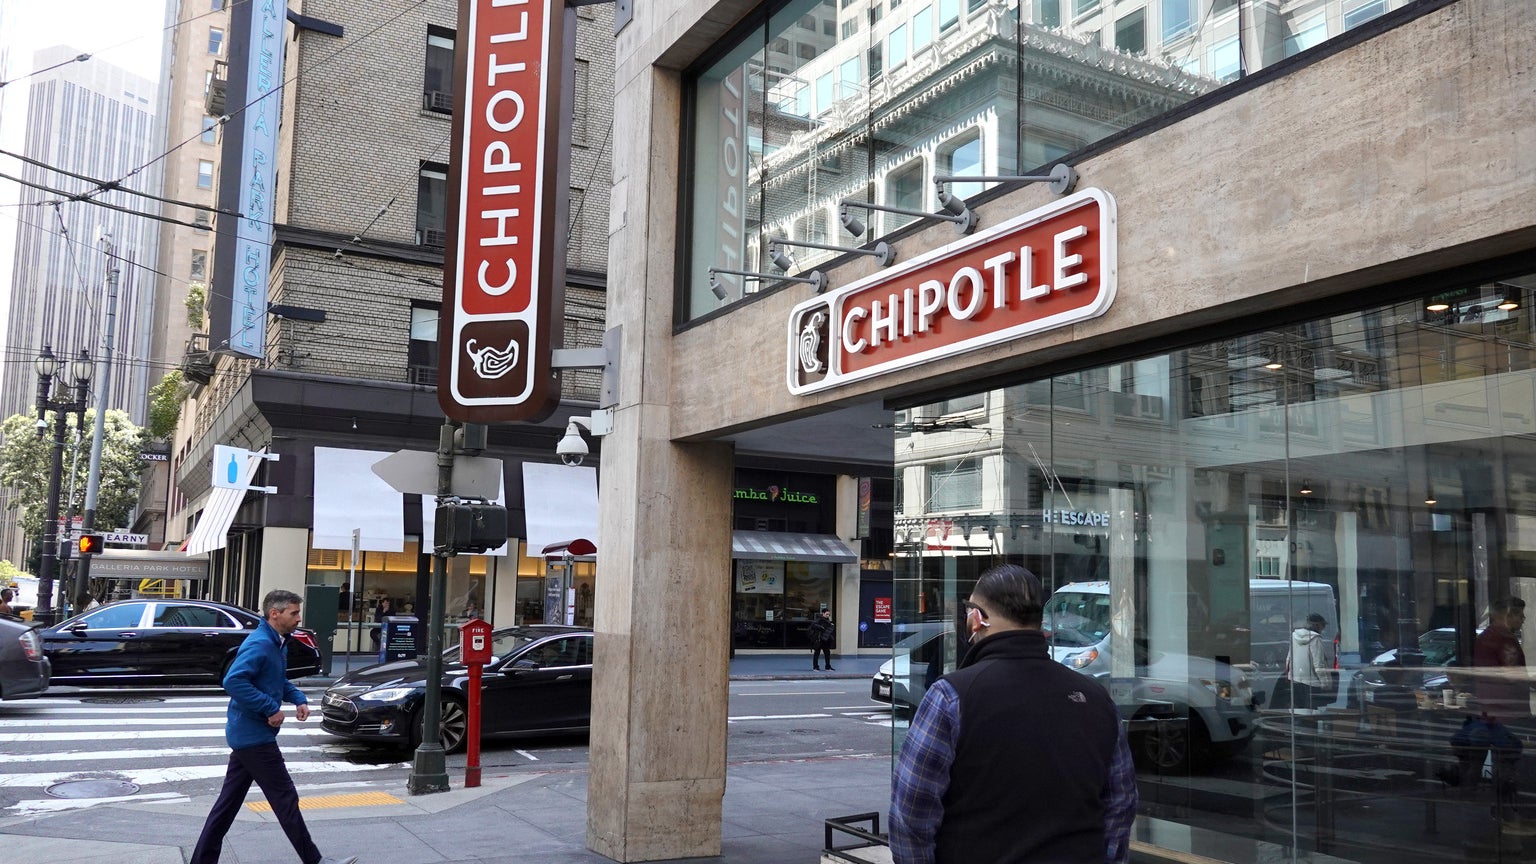 Chipotle increases unit growth target to 7,000 across North